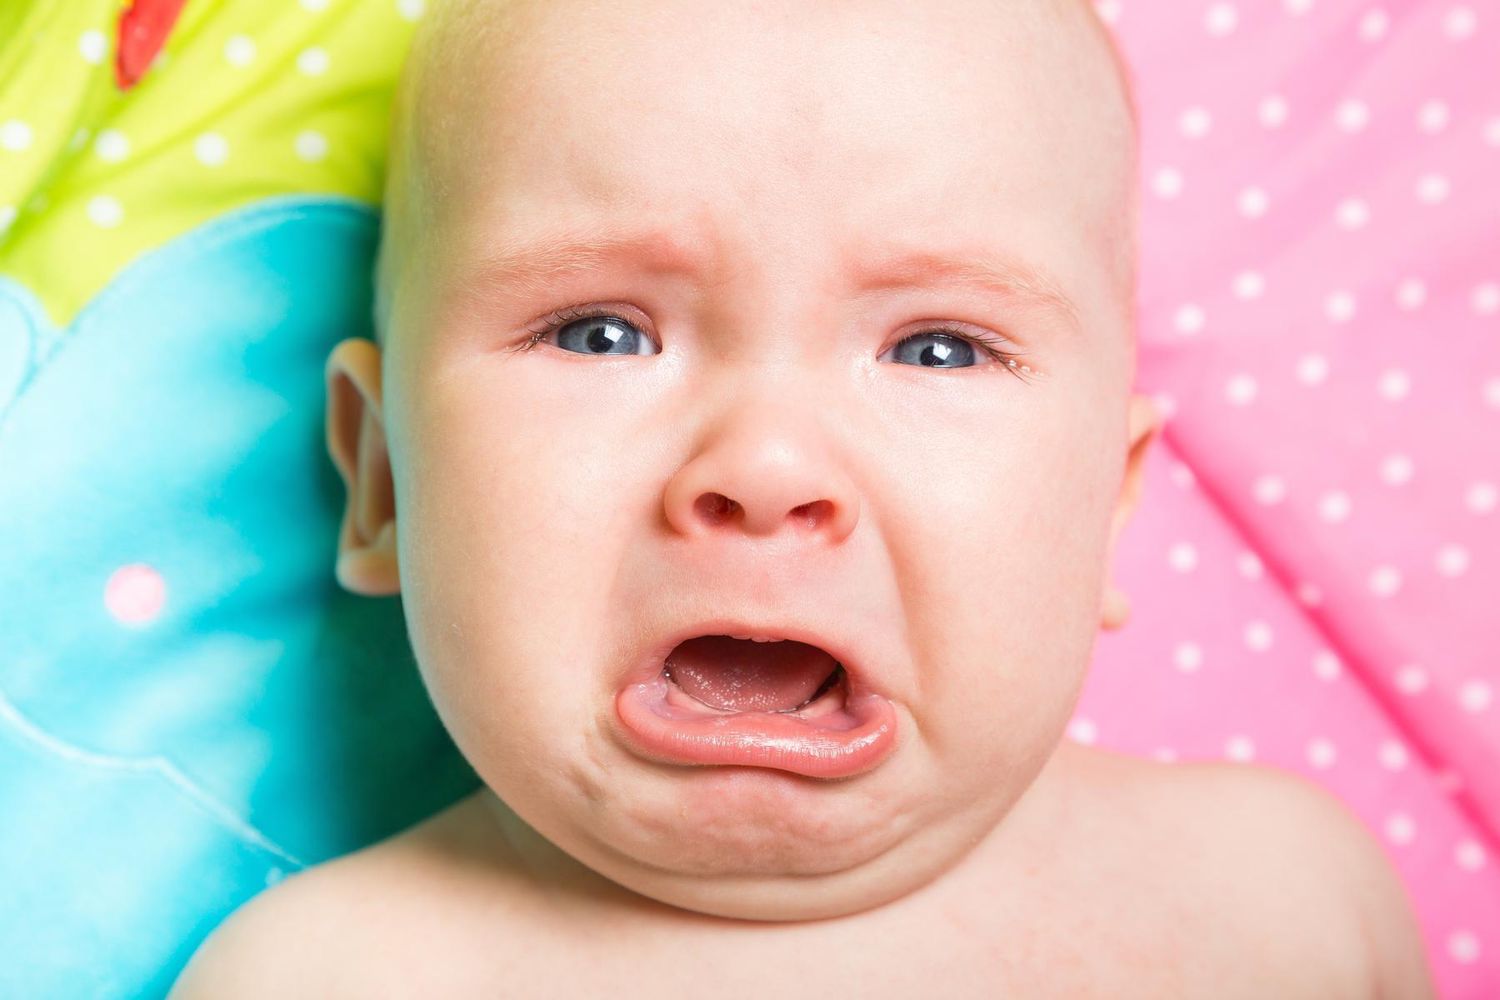 Adults attribute masculine and feminine traits to babies' cries as early as three months old, gender stereotyping babies